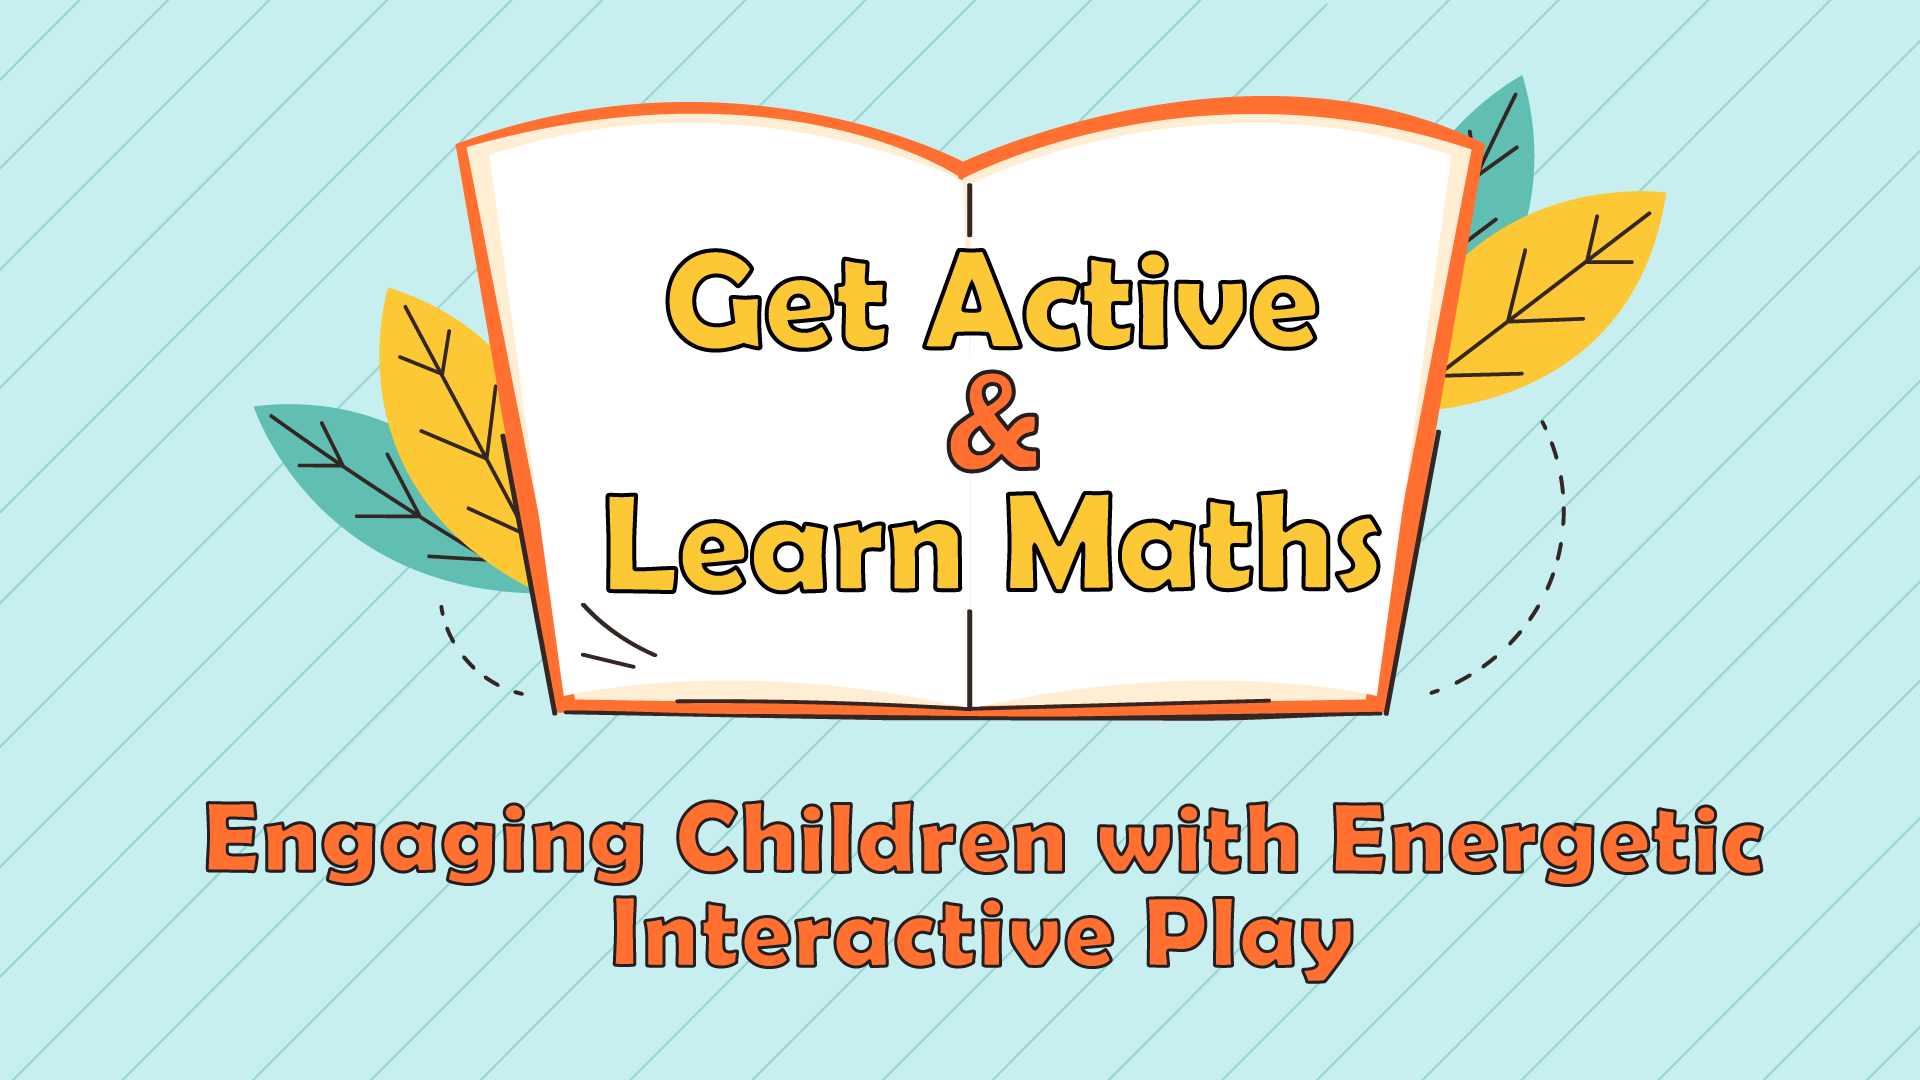 Get Active & Learn Maths: Engaging Children with Energetic Interactive Play